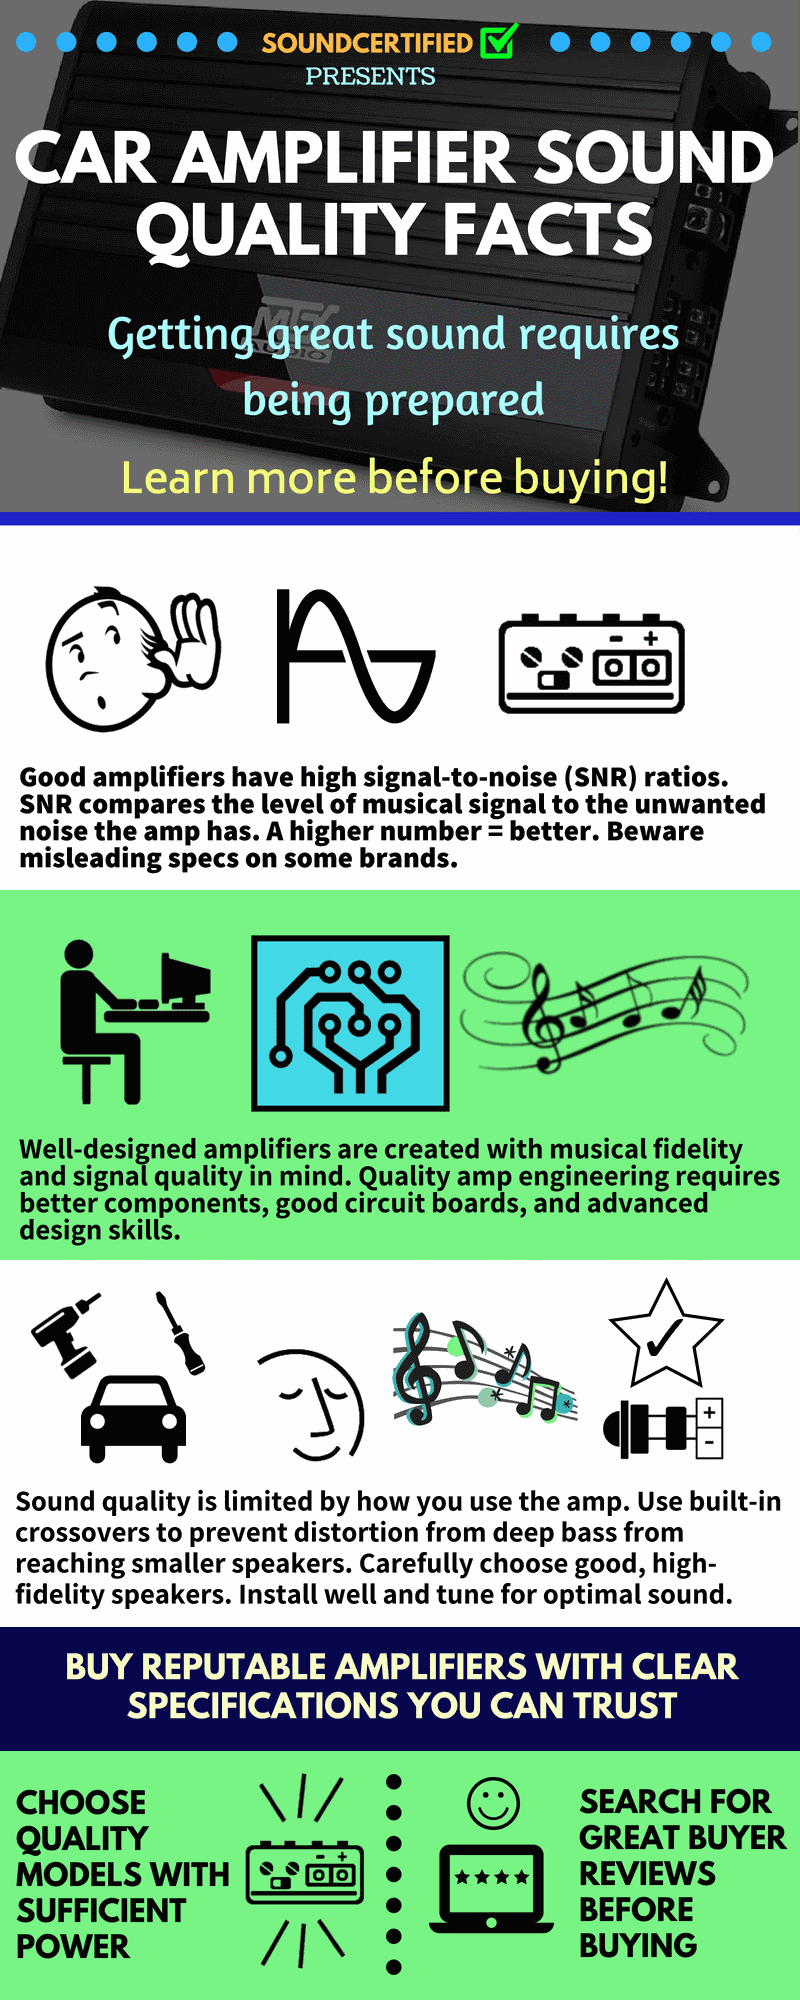 Car amplifier sound quality facts infographic